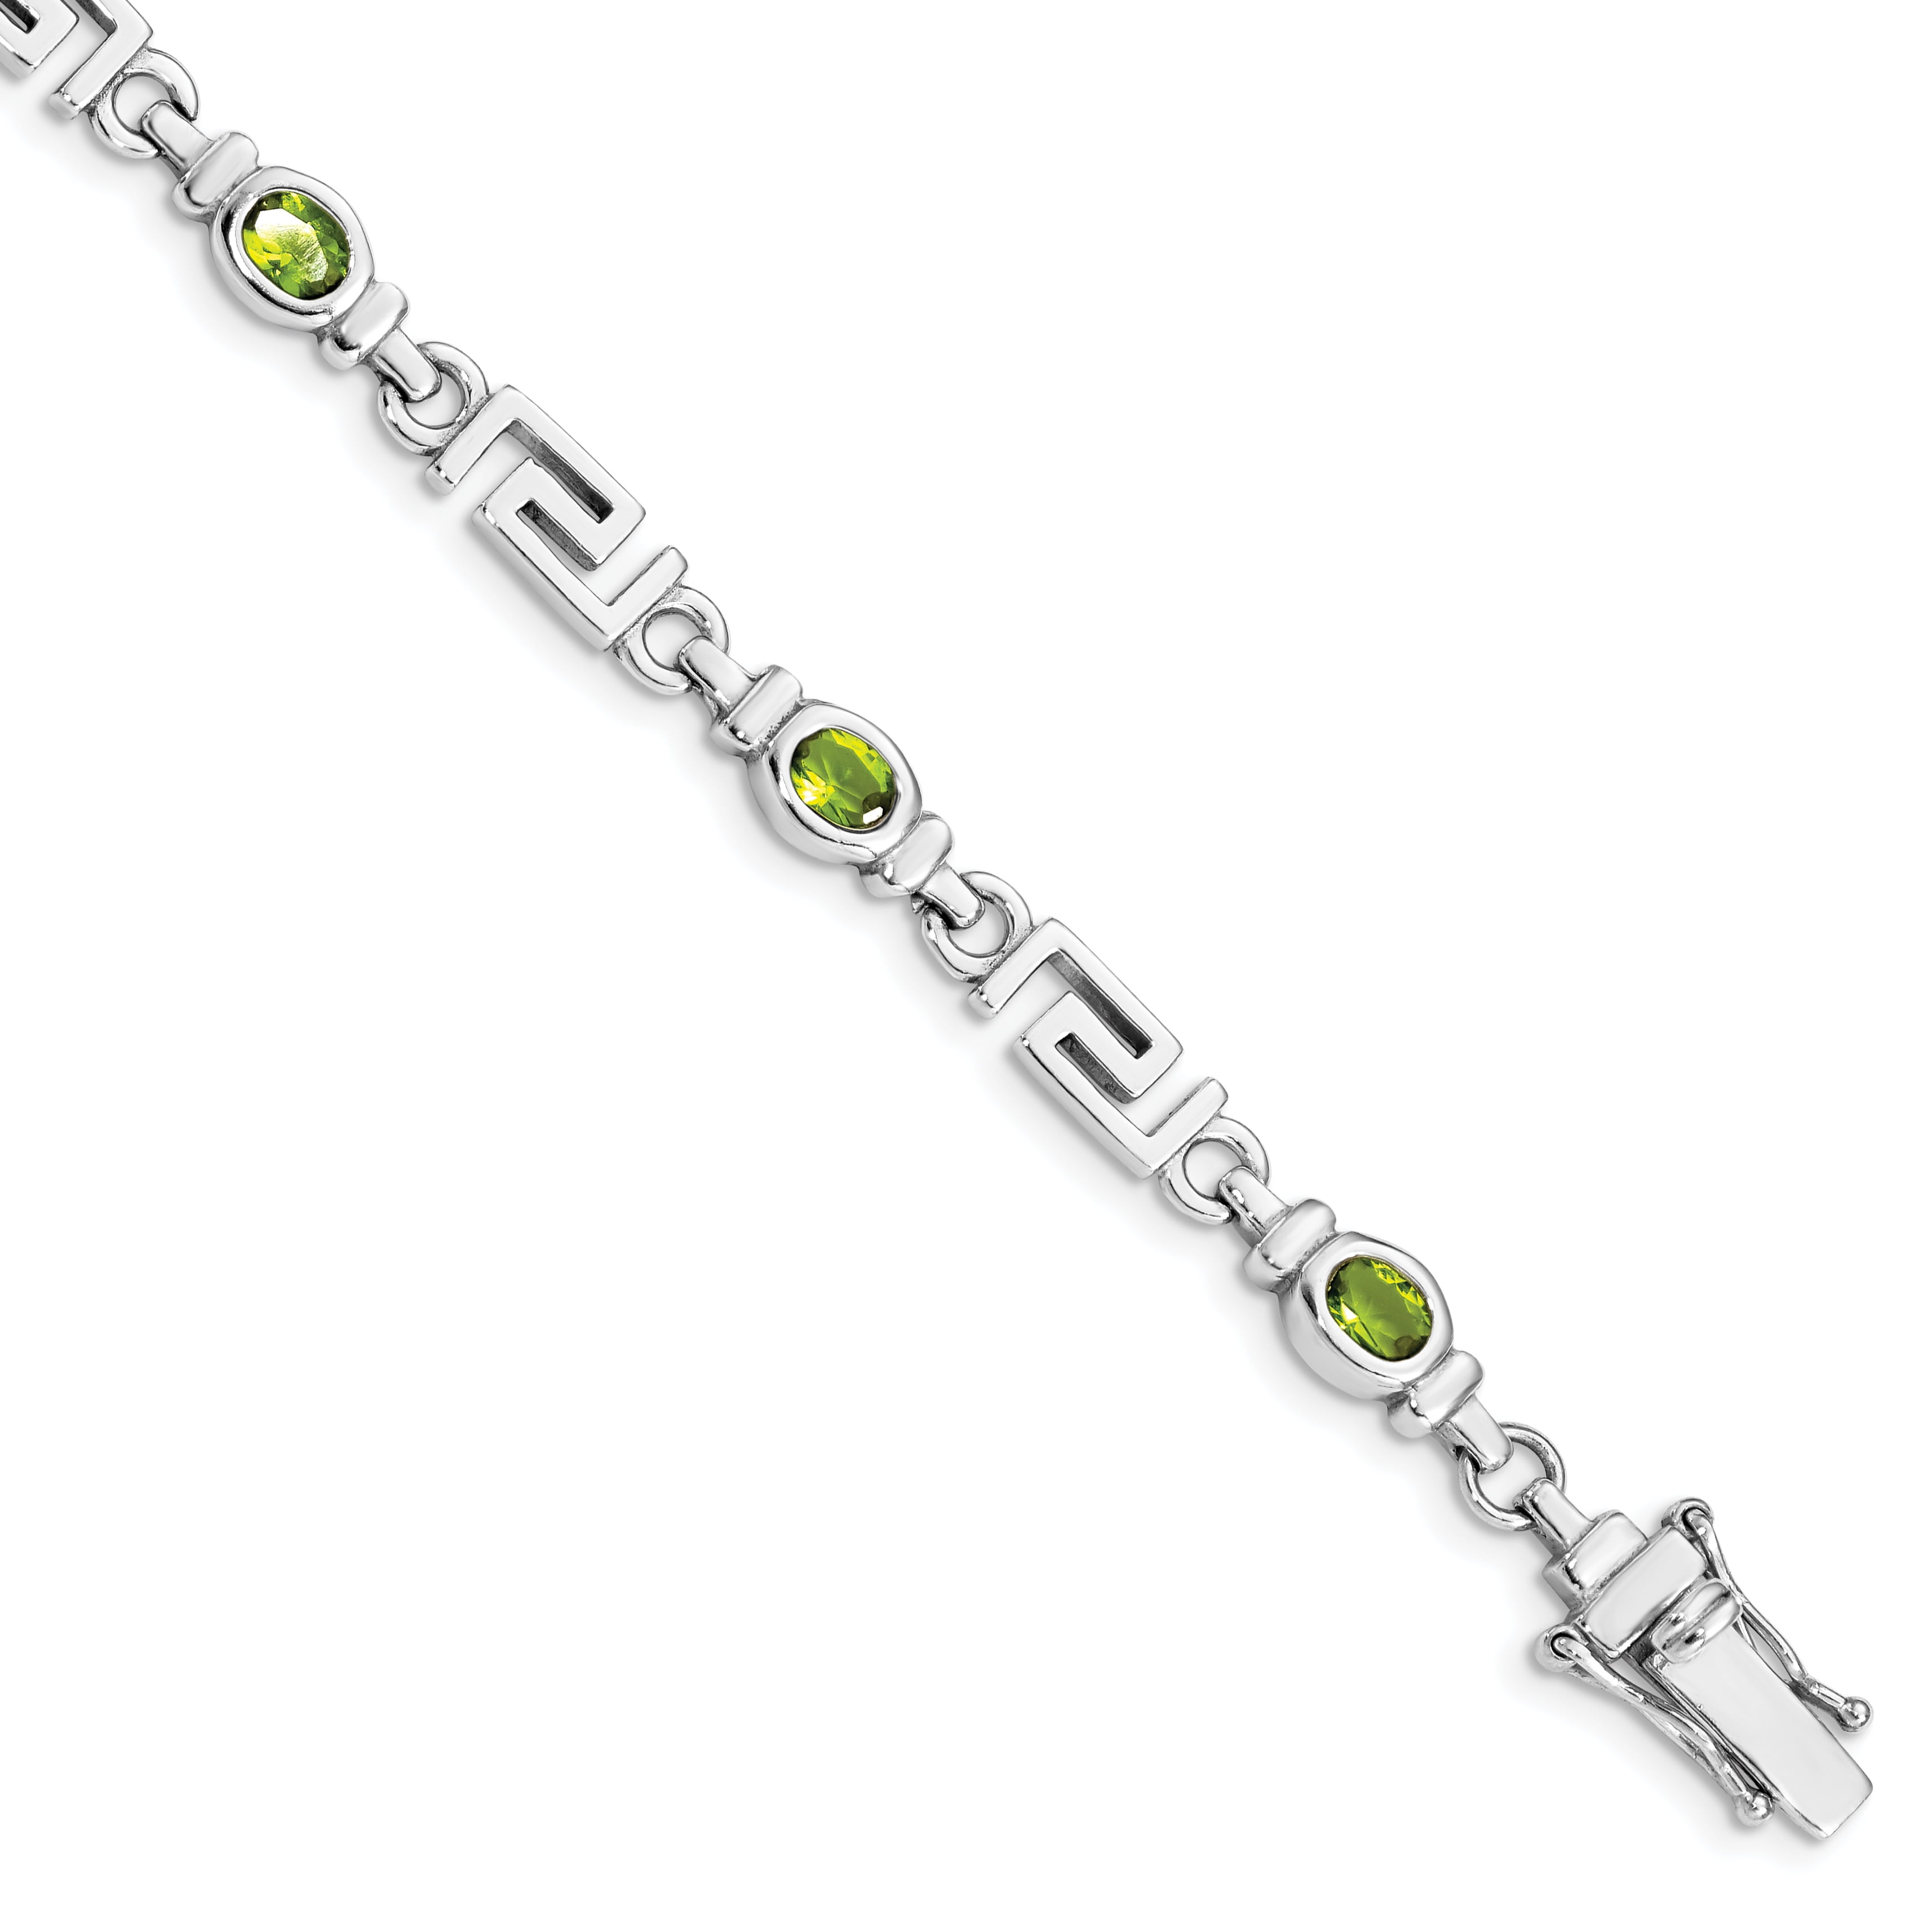 Solid .925 Sterling Silver Rhodium-plated Diamond & Peridot Bracelet 7 inches 